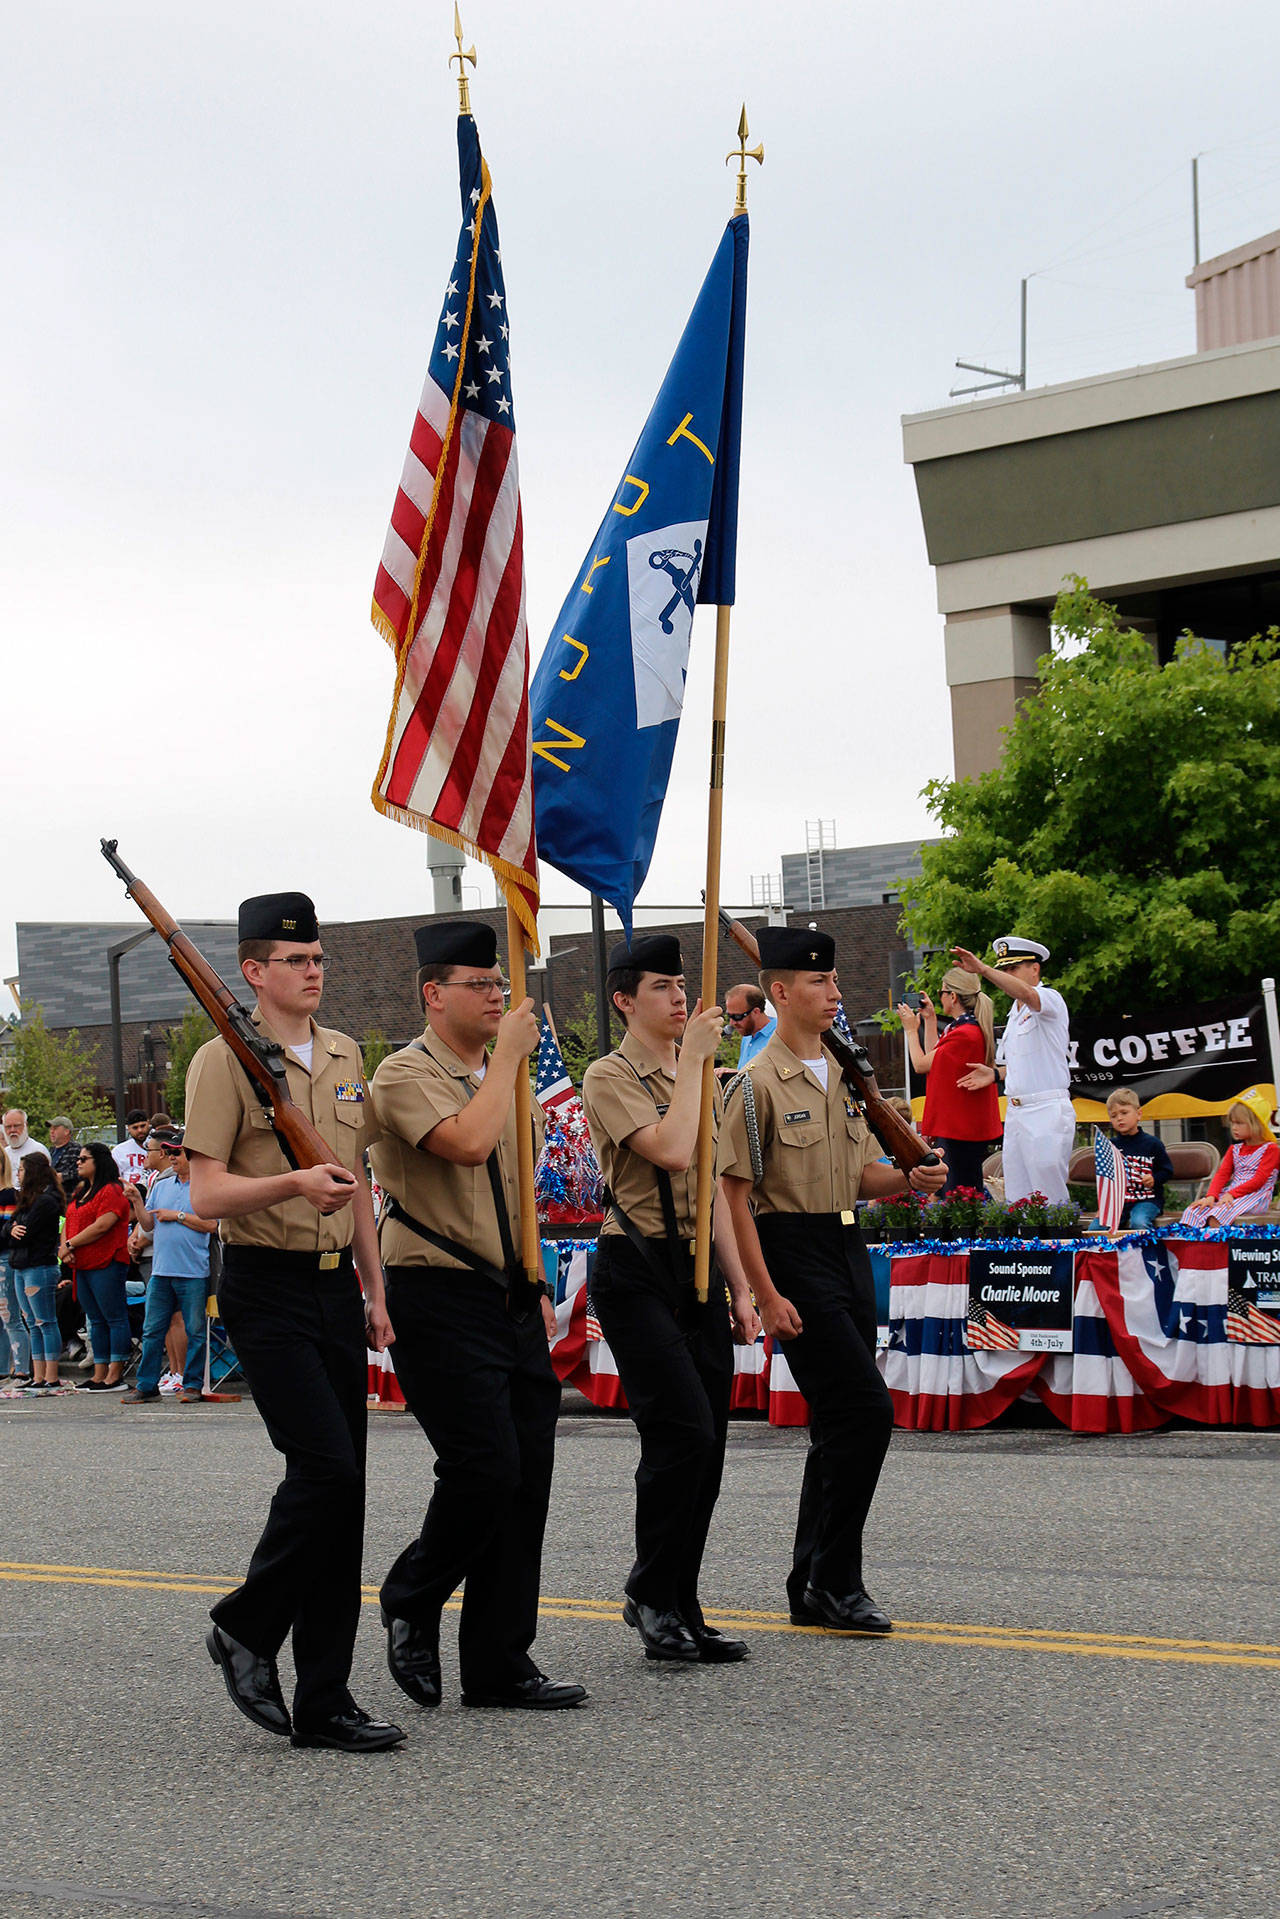 The NJROTC at Thursday’s parade march down the street.